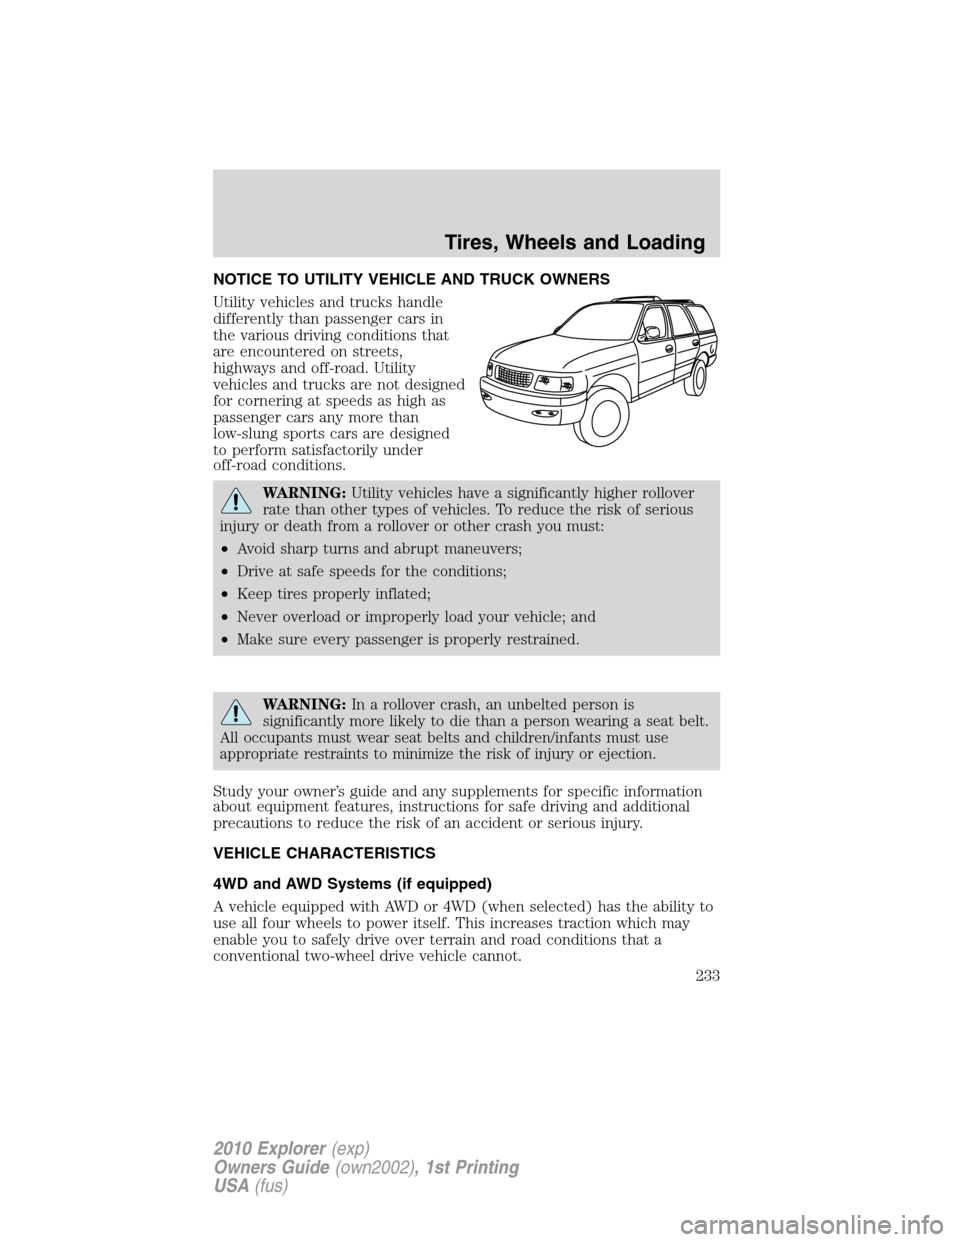 FORD EXPLORER 2010 4.G Owners Manual NOTICE TO UTILITY VEHICLE AND TRUCK OWNERS
Utility vehicles and trucks handle
differently than passenger cars in
the various driving conditions that
are encountered on streets,
highways and off-road. 